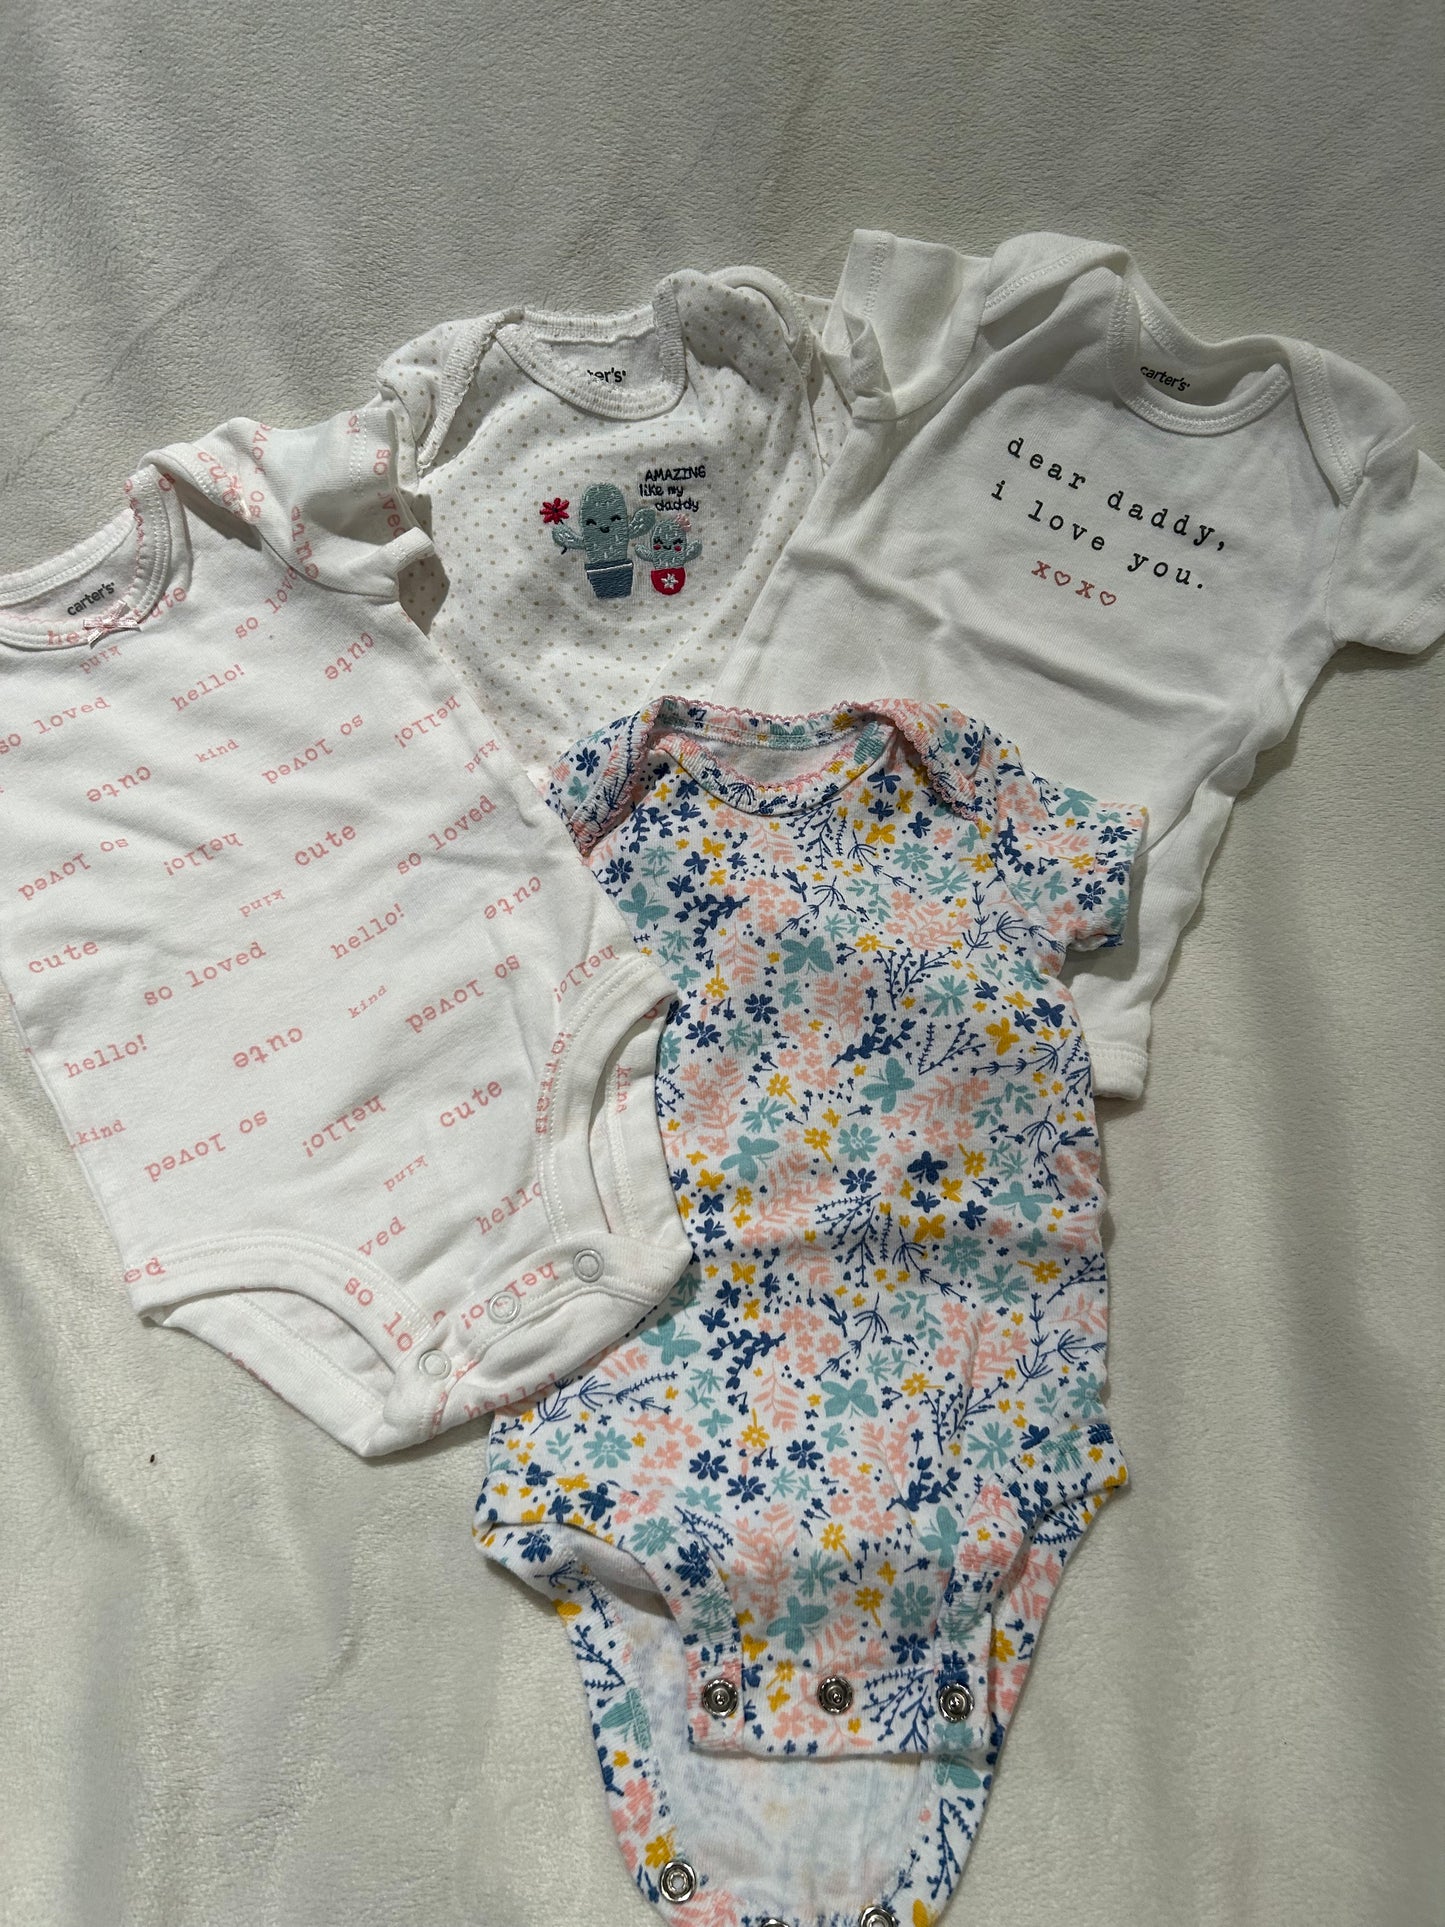 Carter's 3 months onesies -set of 4 (Floral / Dear Daddy / Hello So Loved / Amazing like my Daddy)